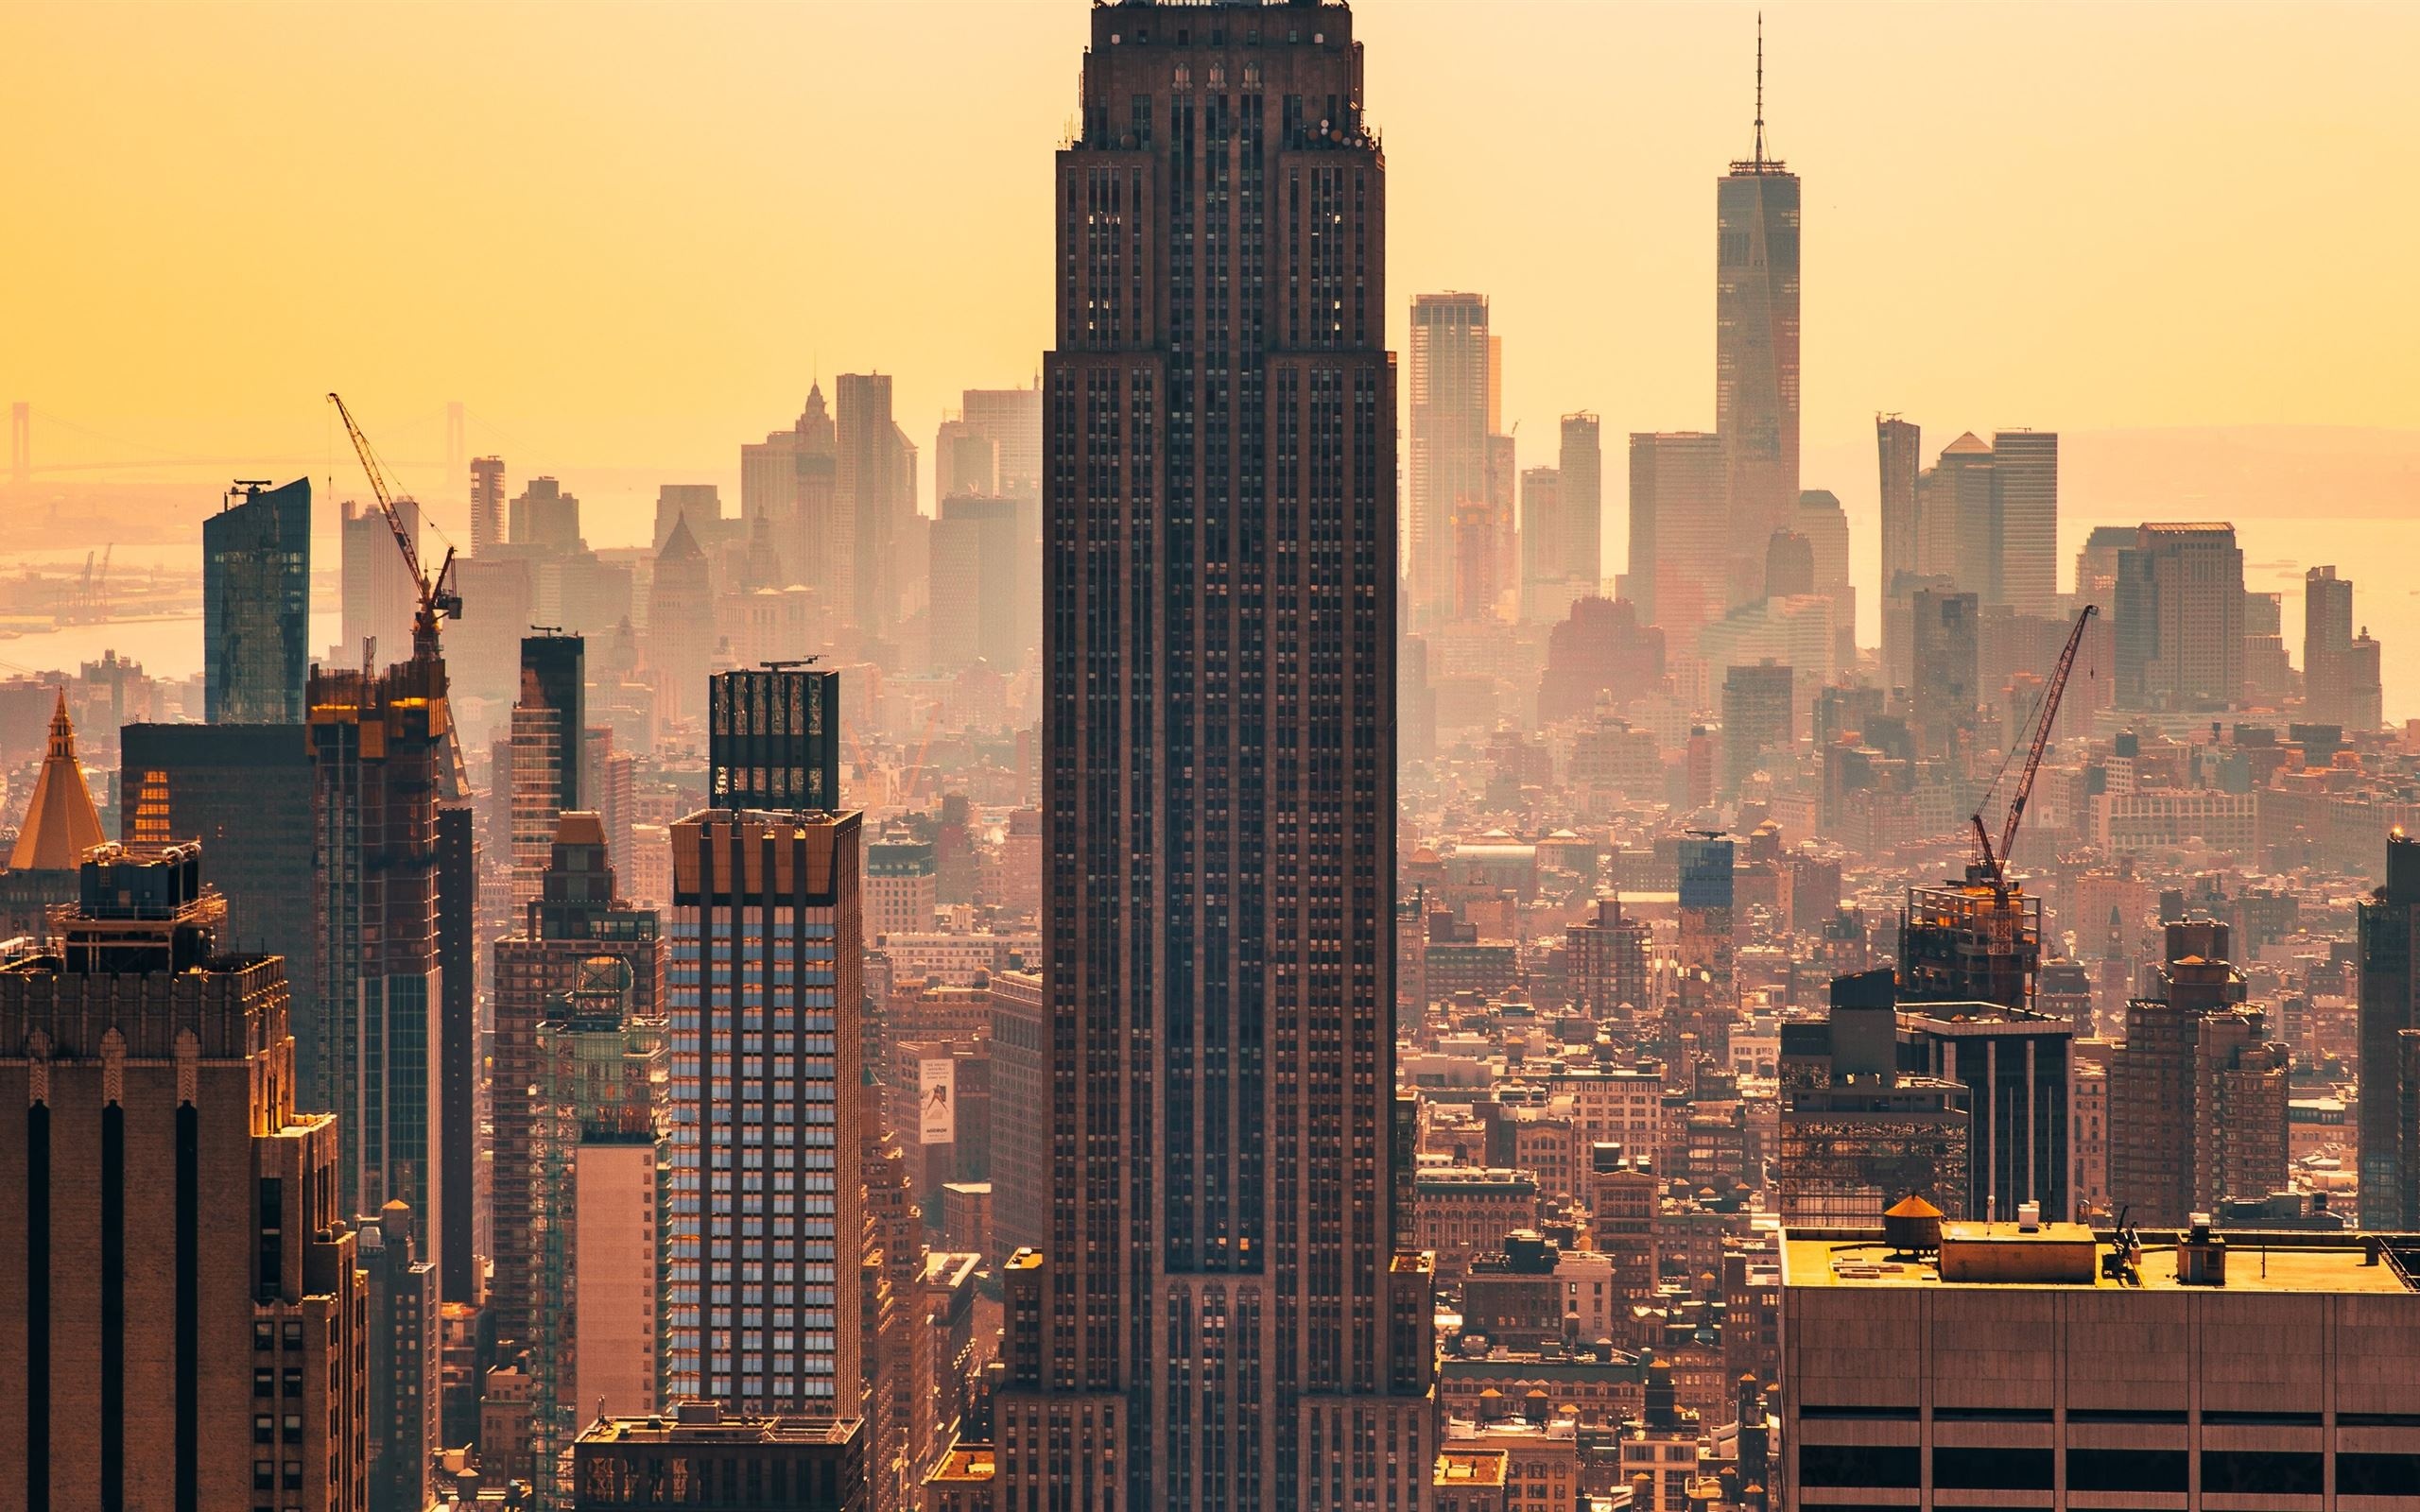 Empire State Building, Sky-high views, Concrete jungle, Steel and glass, 2560x1600 HD Desktop